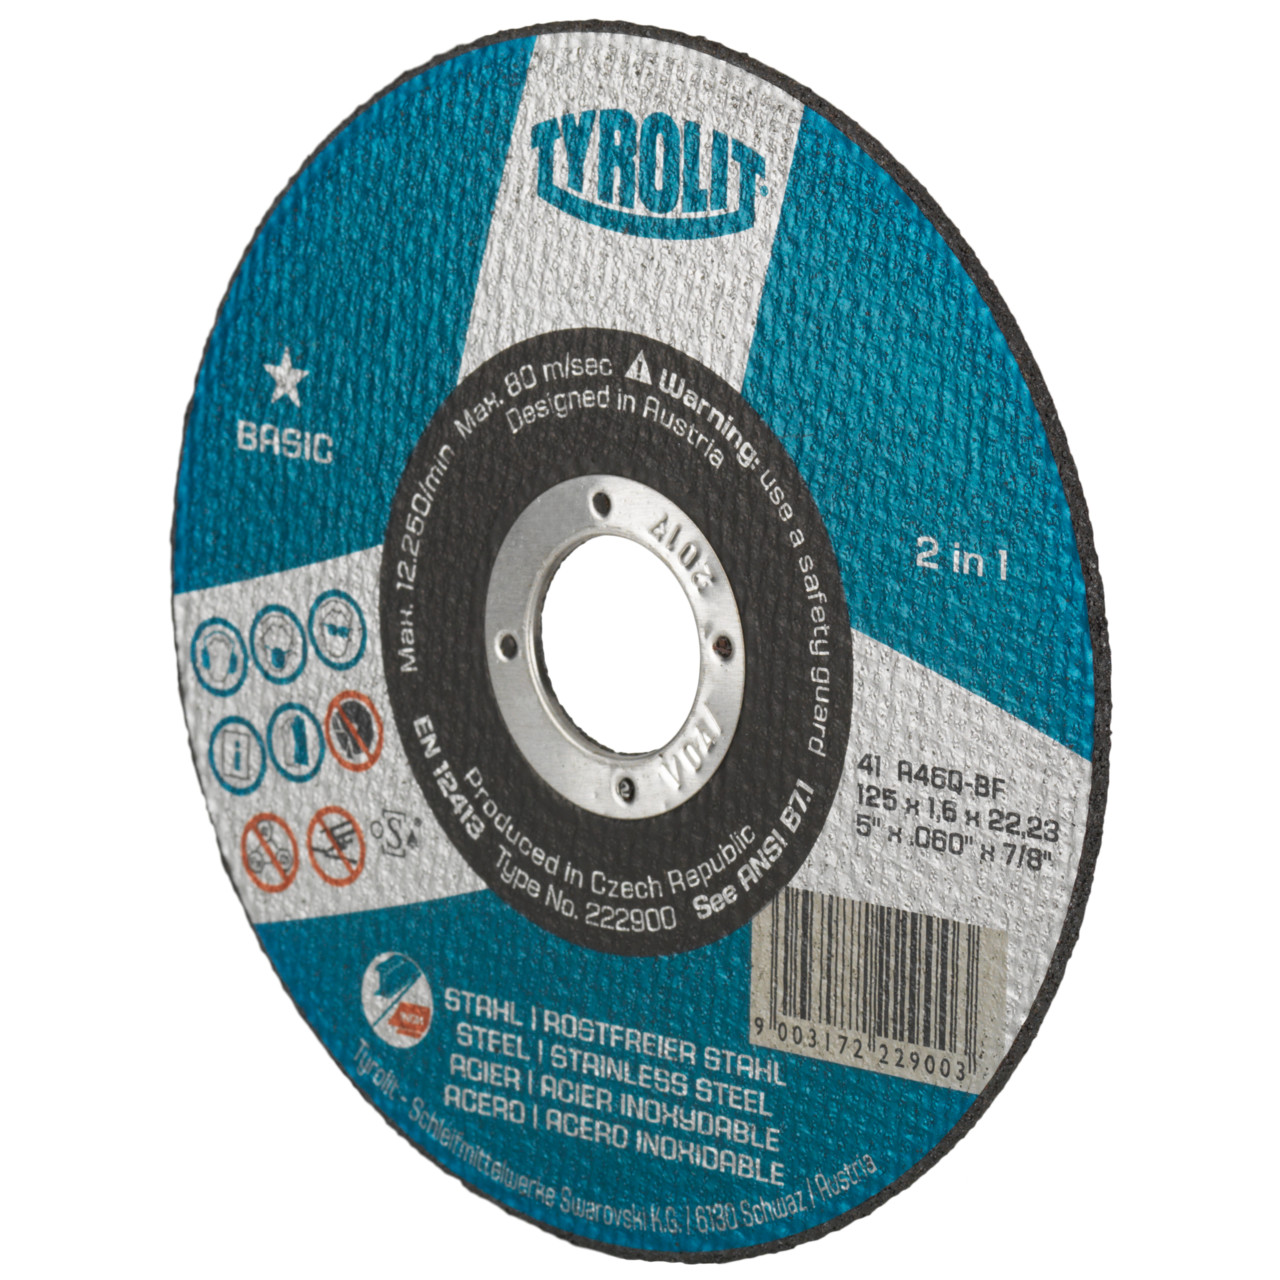 Tyrolit Cutting discs DxDxH 150x1.6x22.23 2in1 for steel and stainless steel, shape: 41 - straight version, Art. 34332874